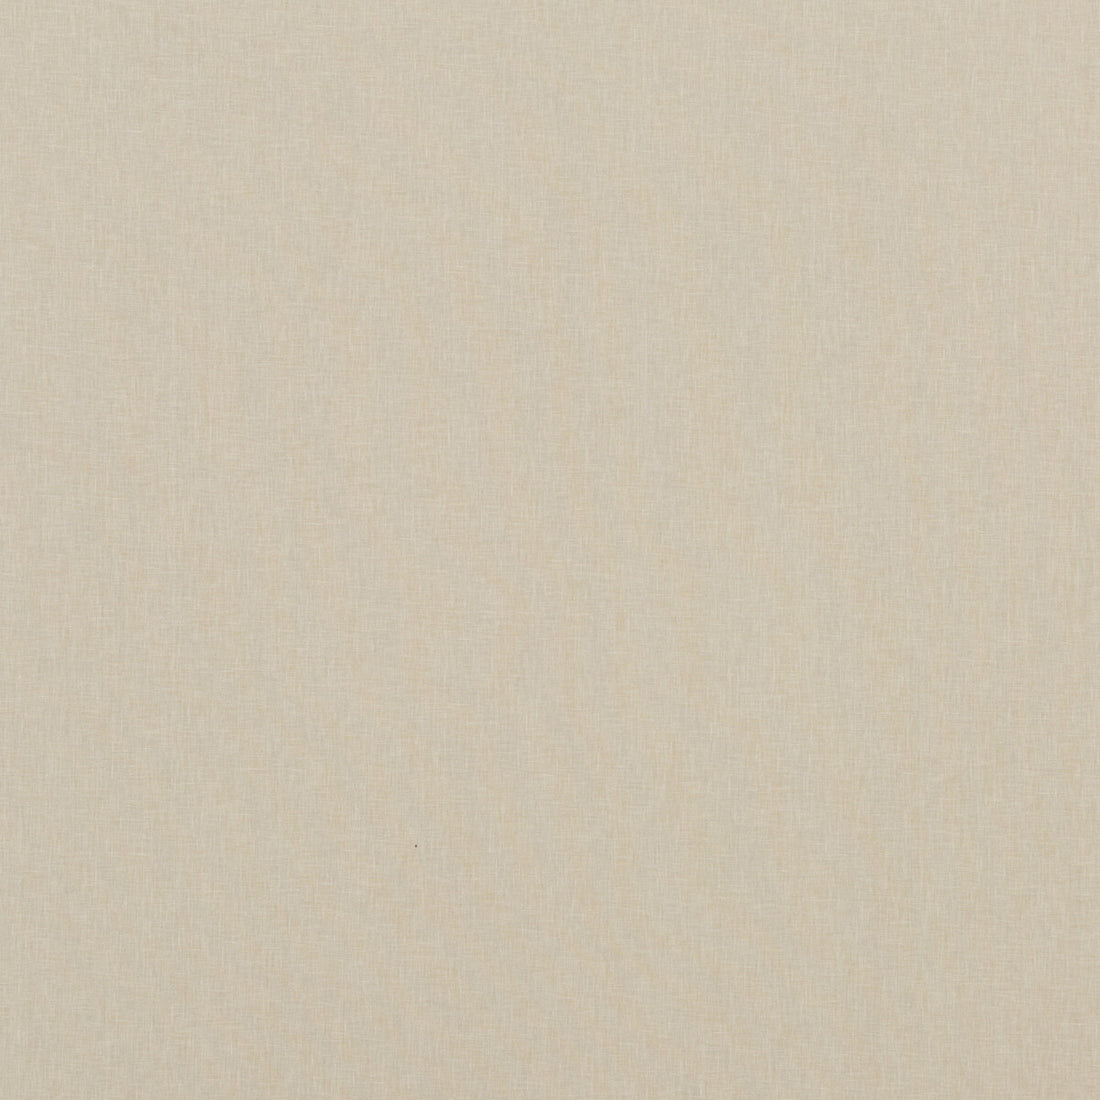 Carnival Plain fabric in oatmeal color - pattern PF50420.230.0 - by Baker Lifestyle in the Carnival collection